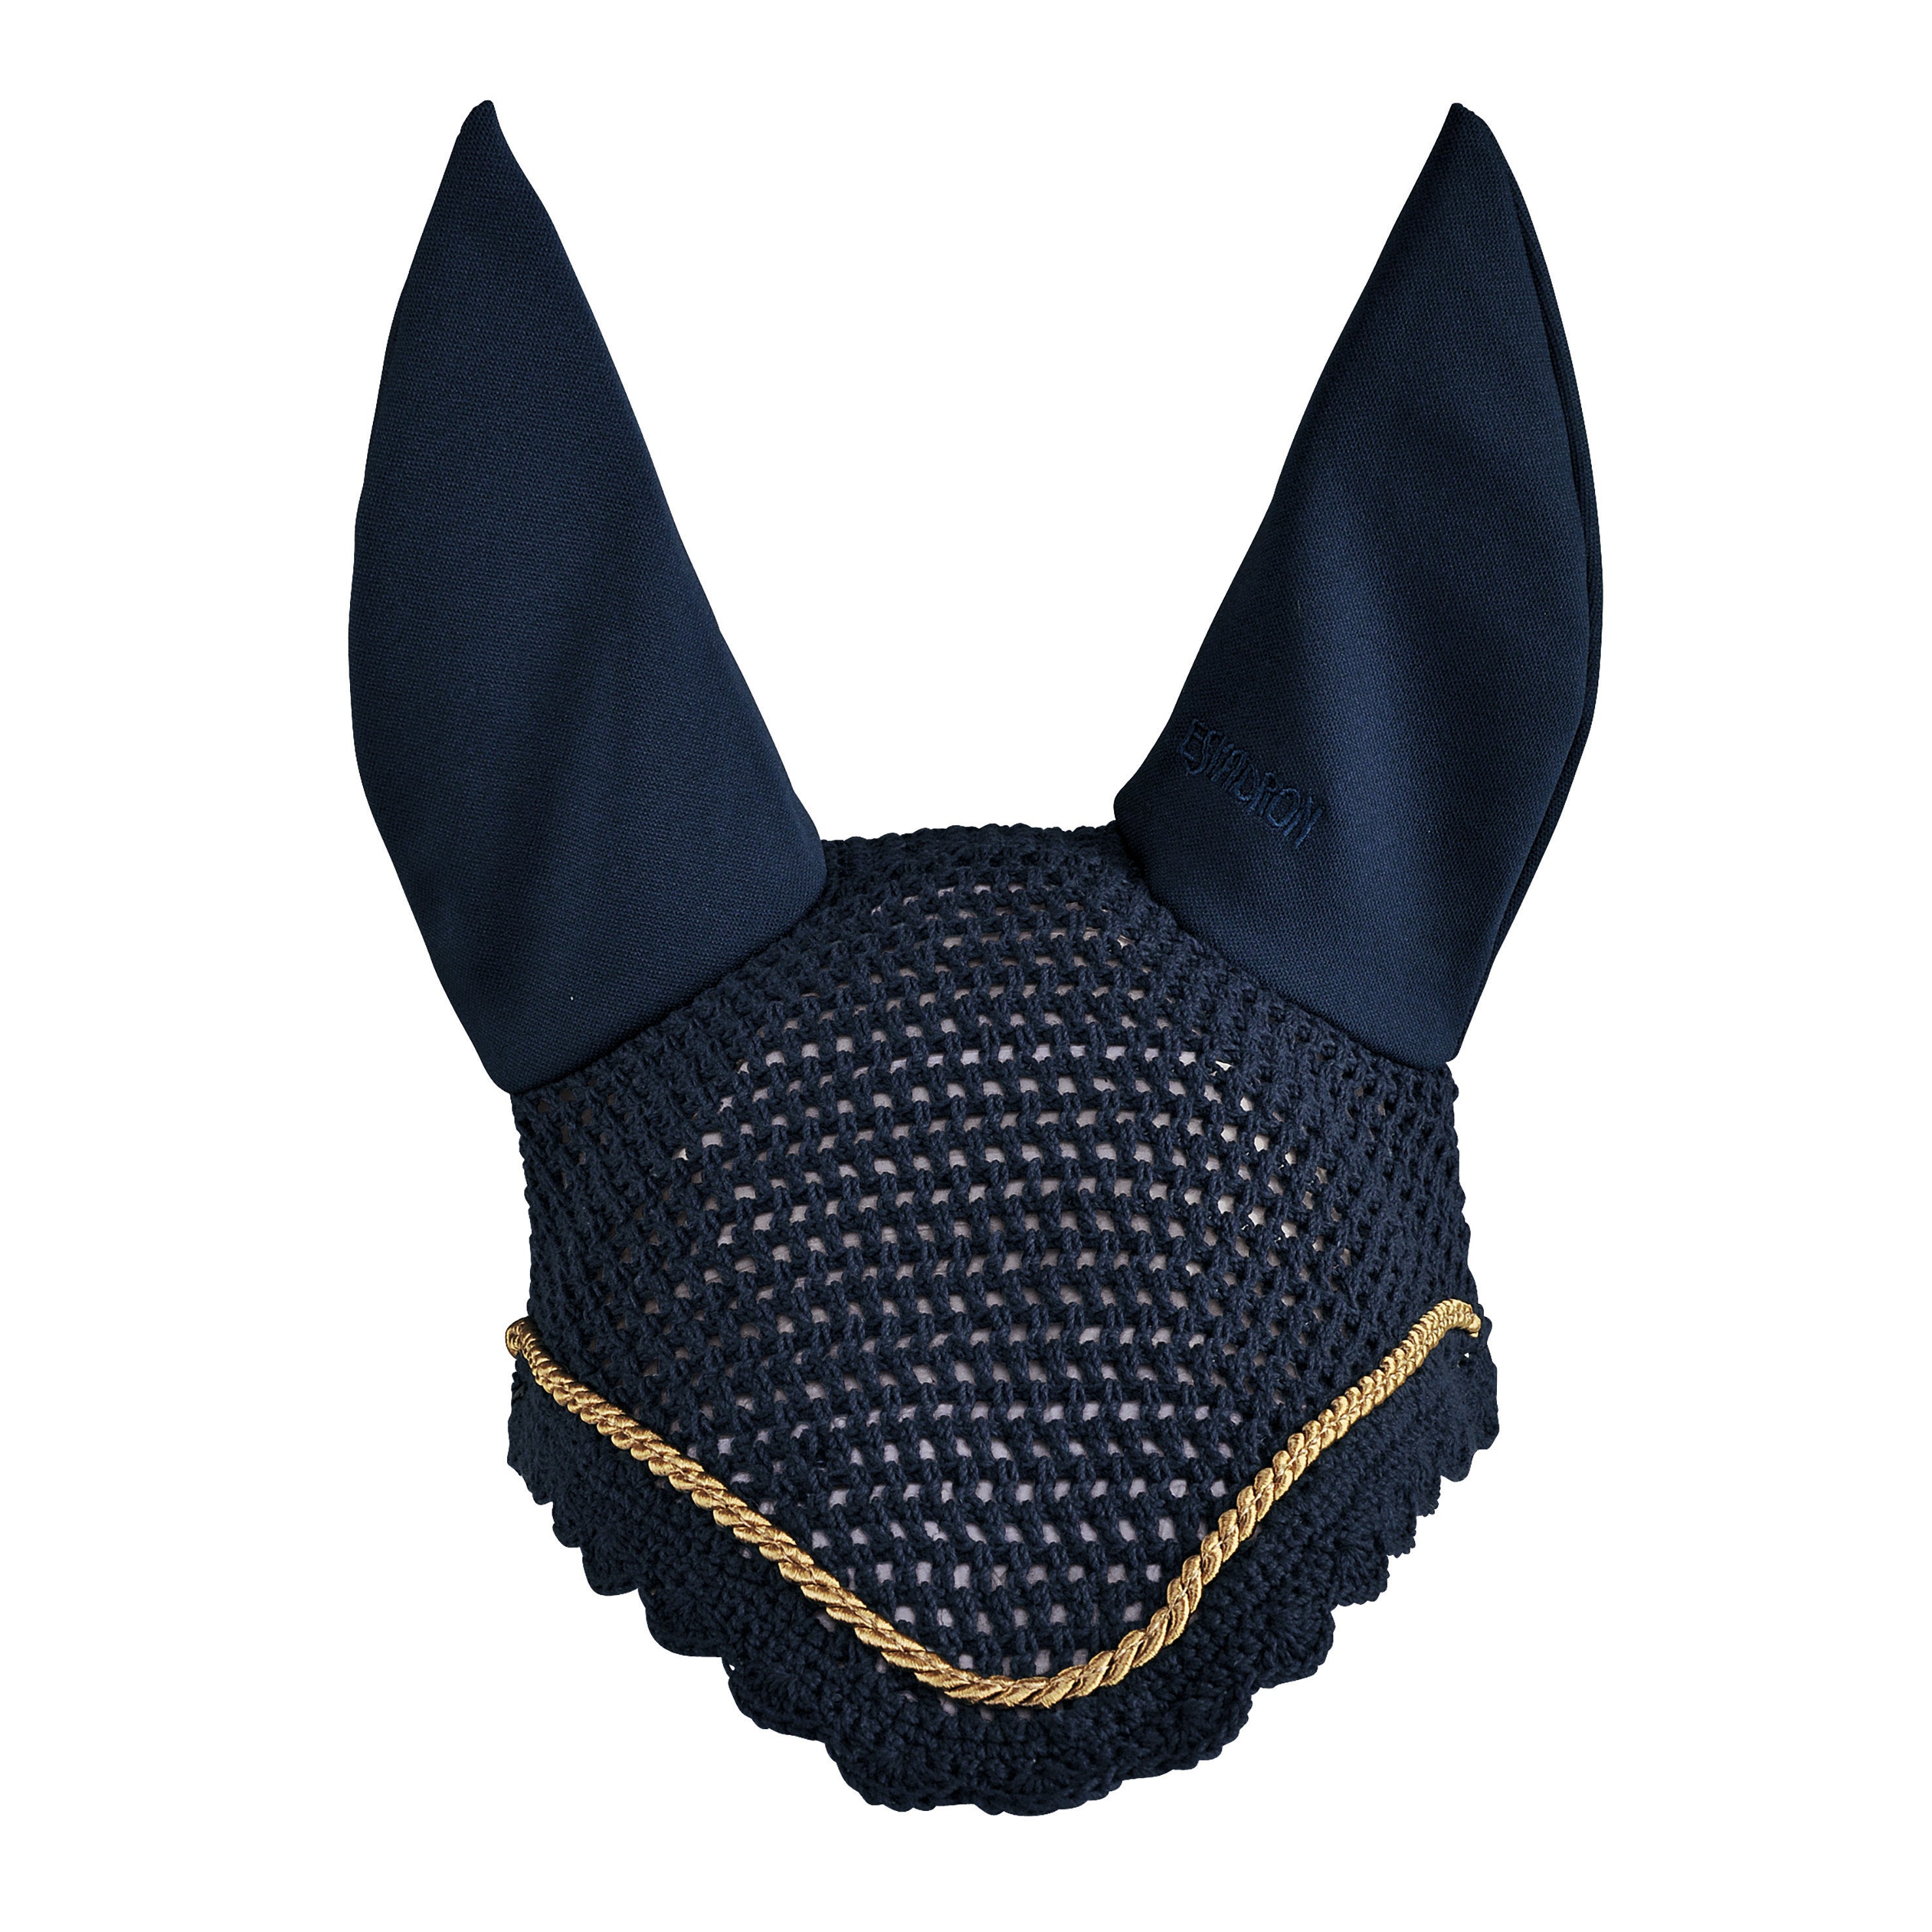 Eskadron Anti-Fly Hood with Gold Piping